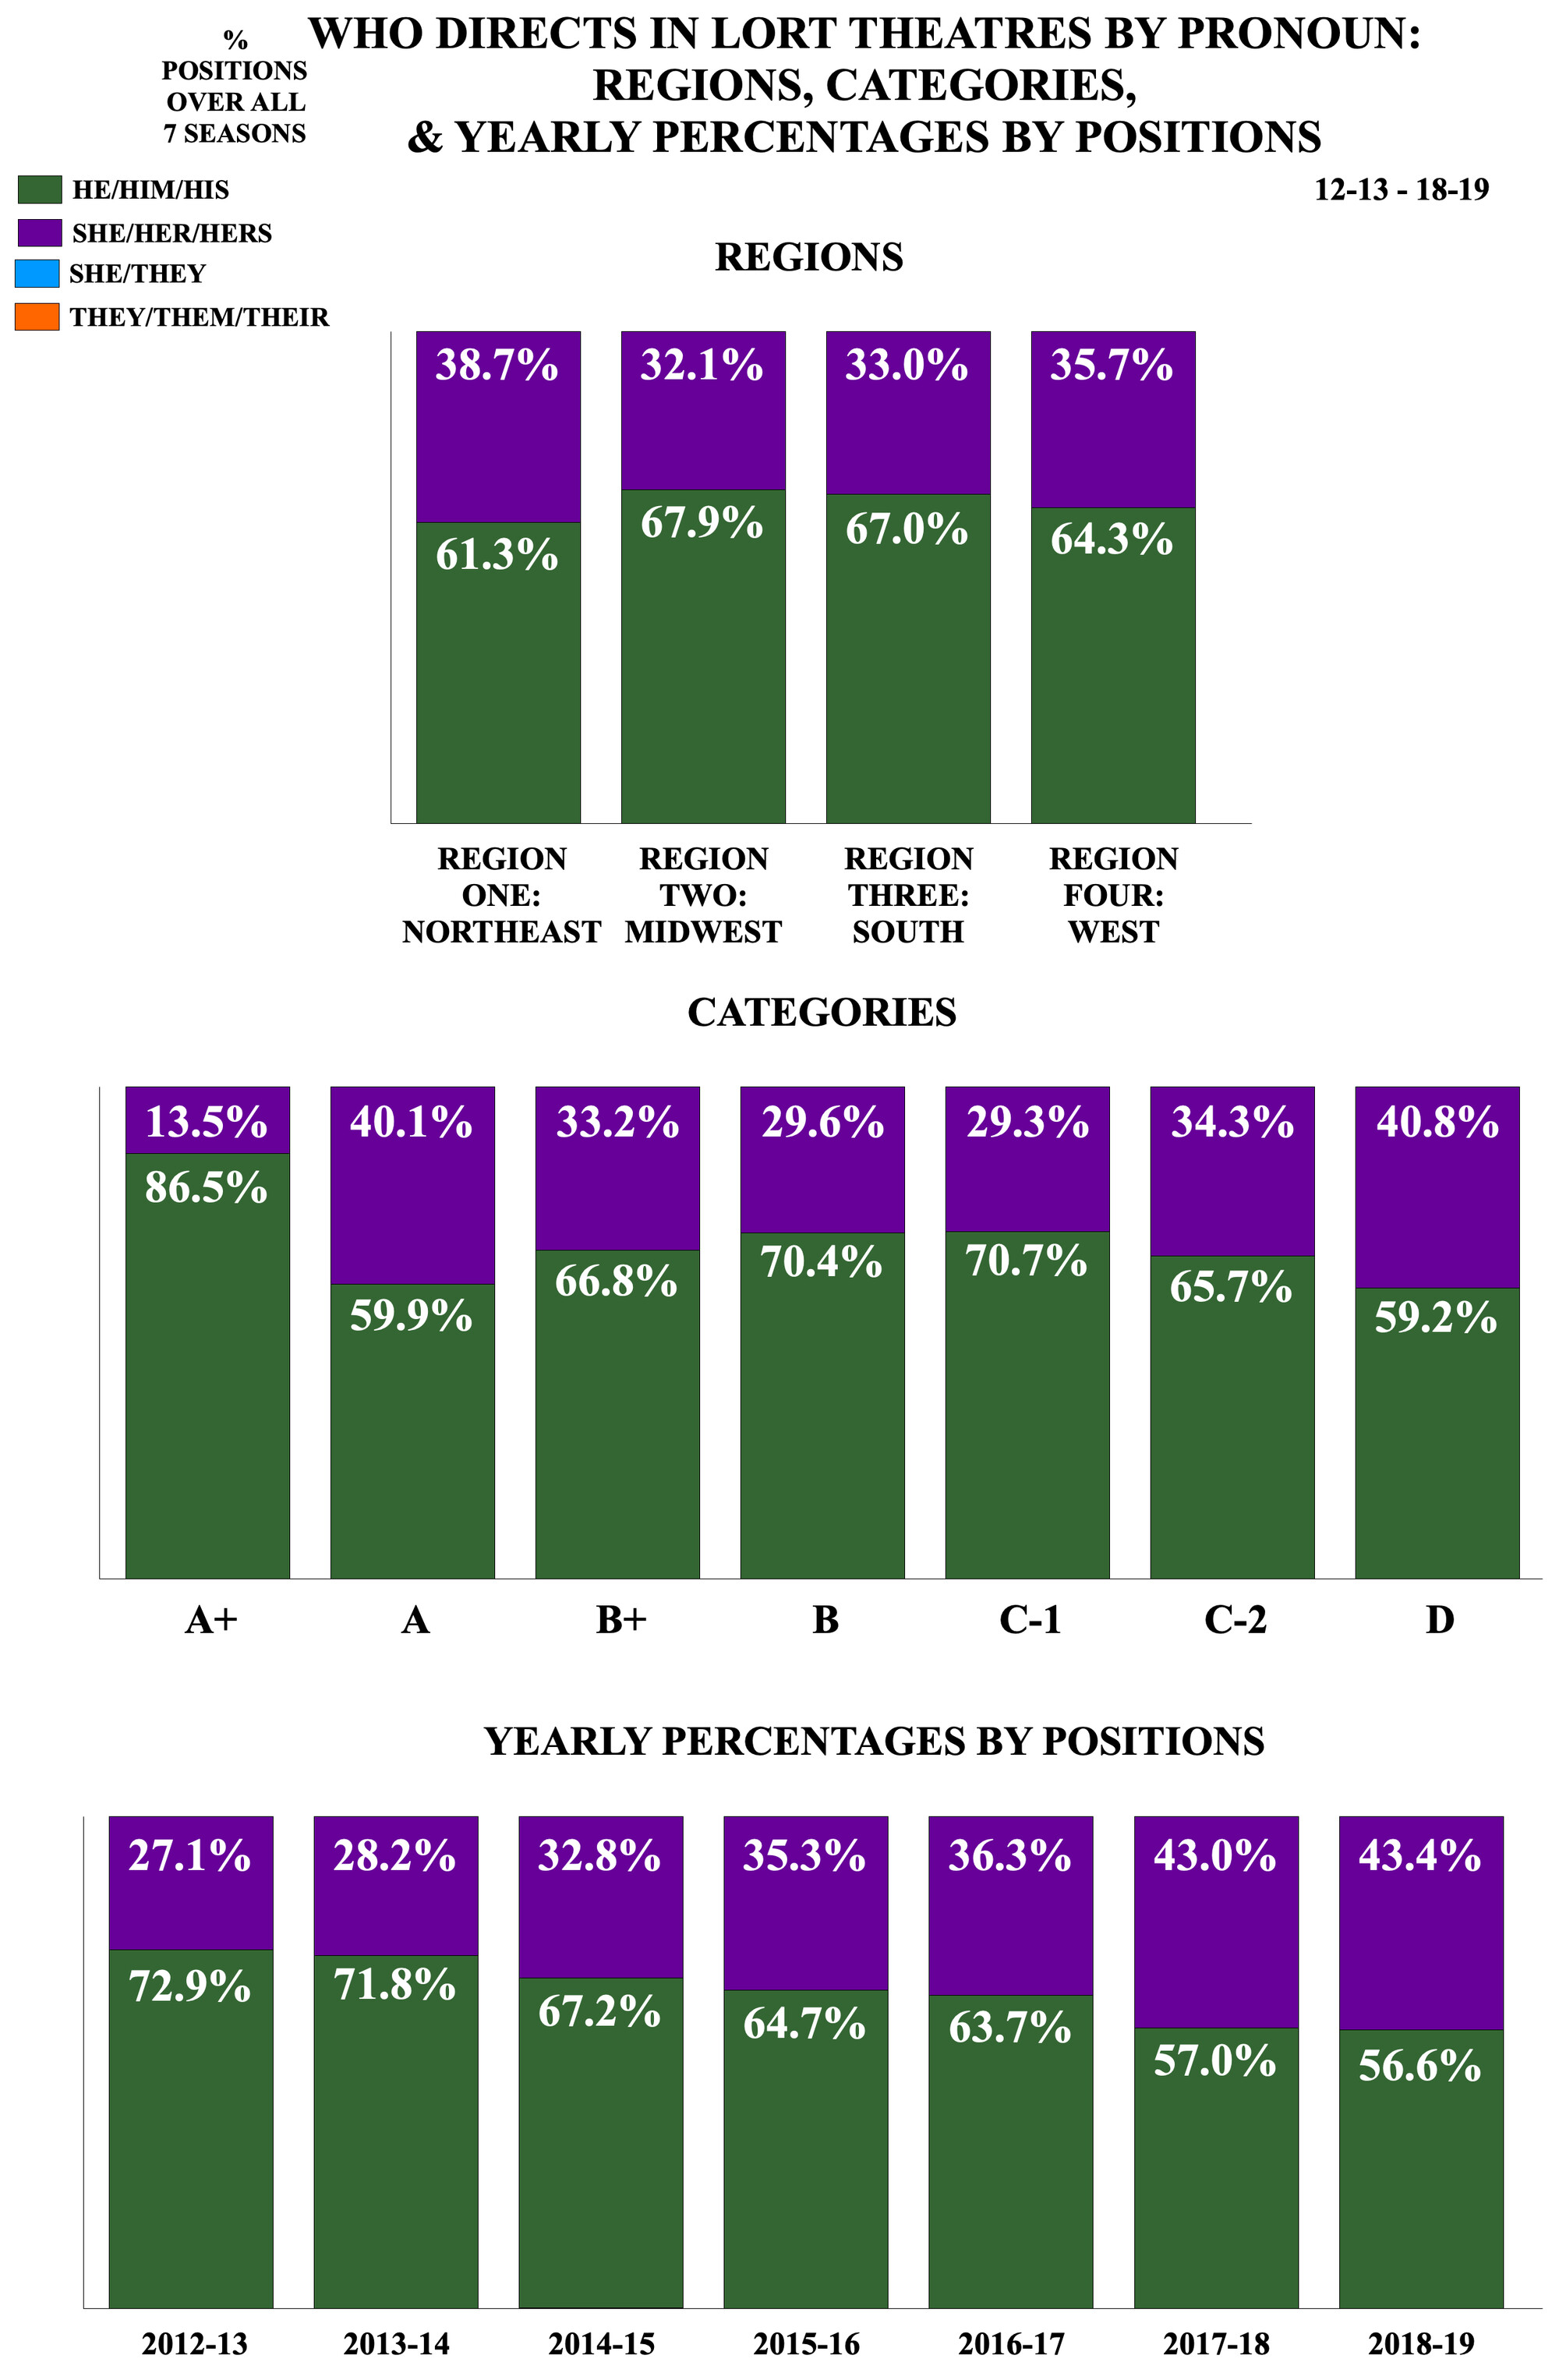 Who Directs in LORT Theatres by Pronoun: Regions, Categories, & Yearly Percentages of Positions 